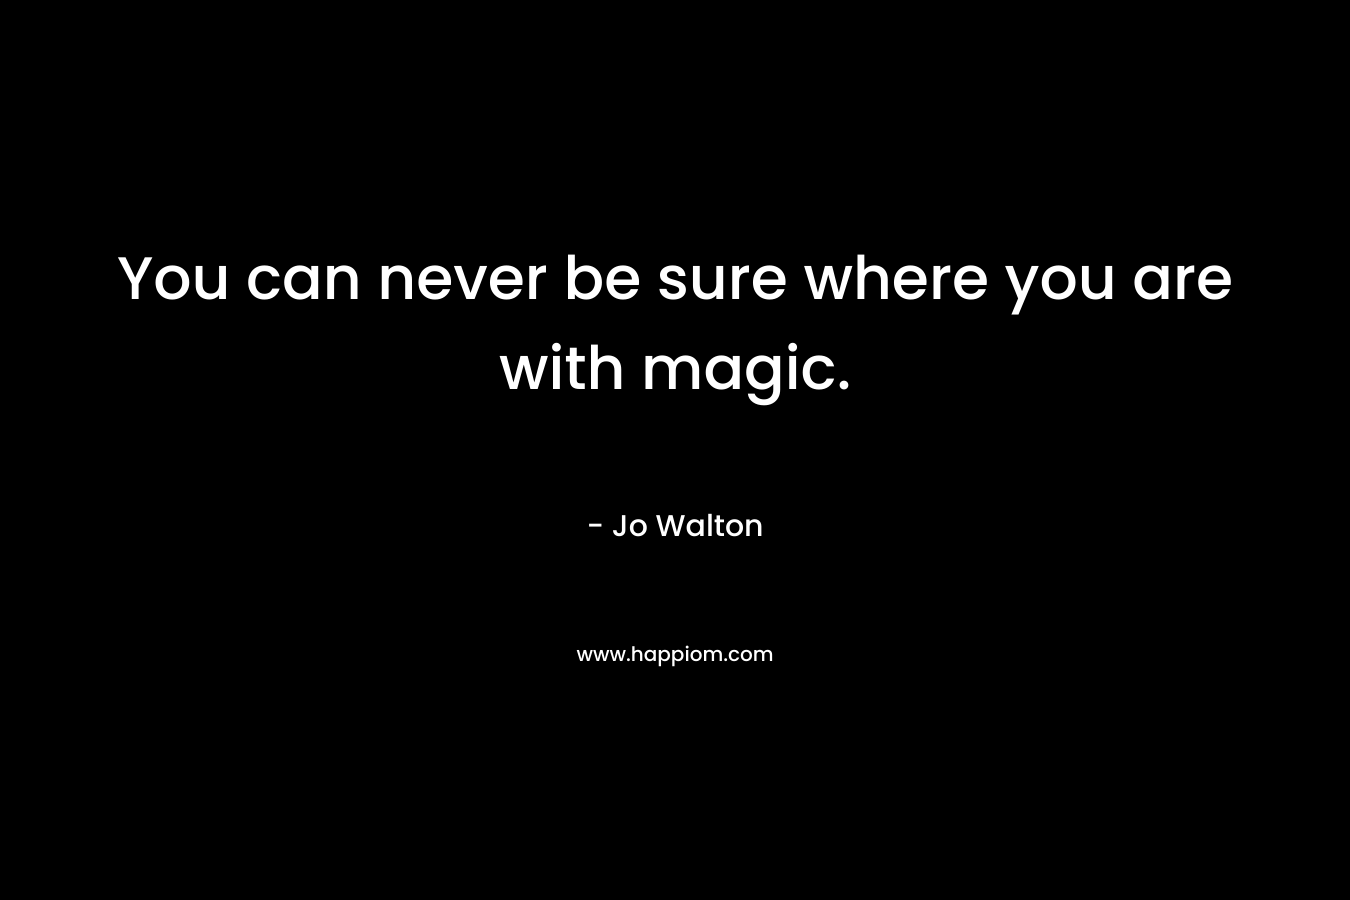 You can never be sure where you are with magic.